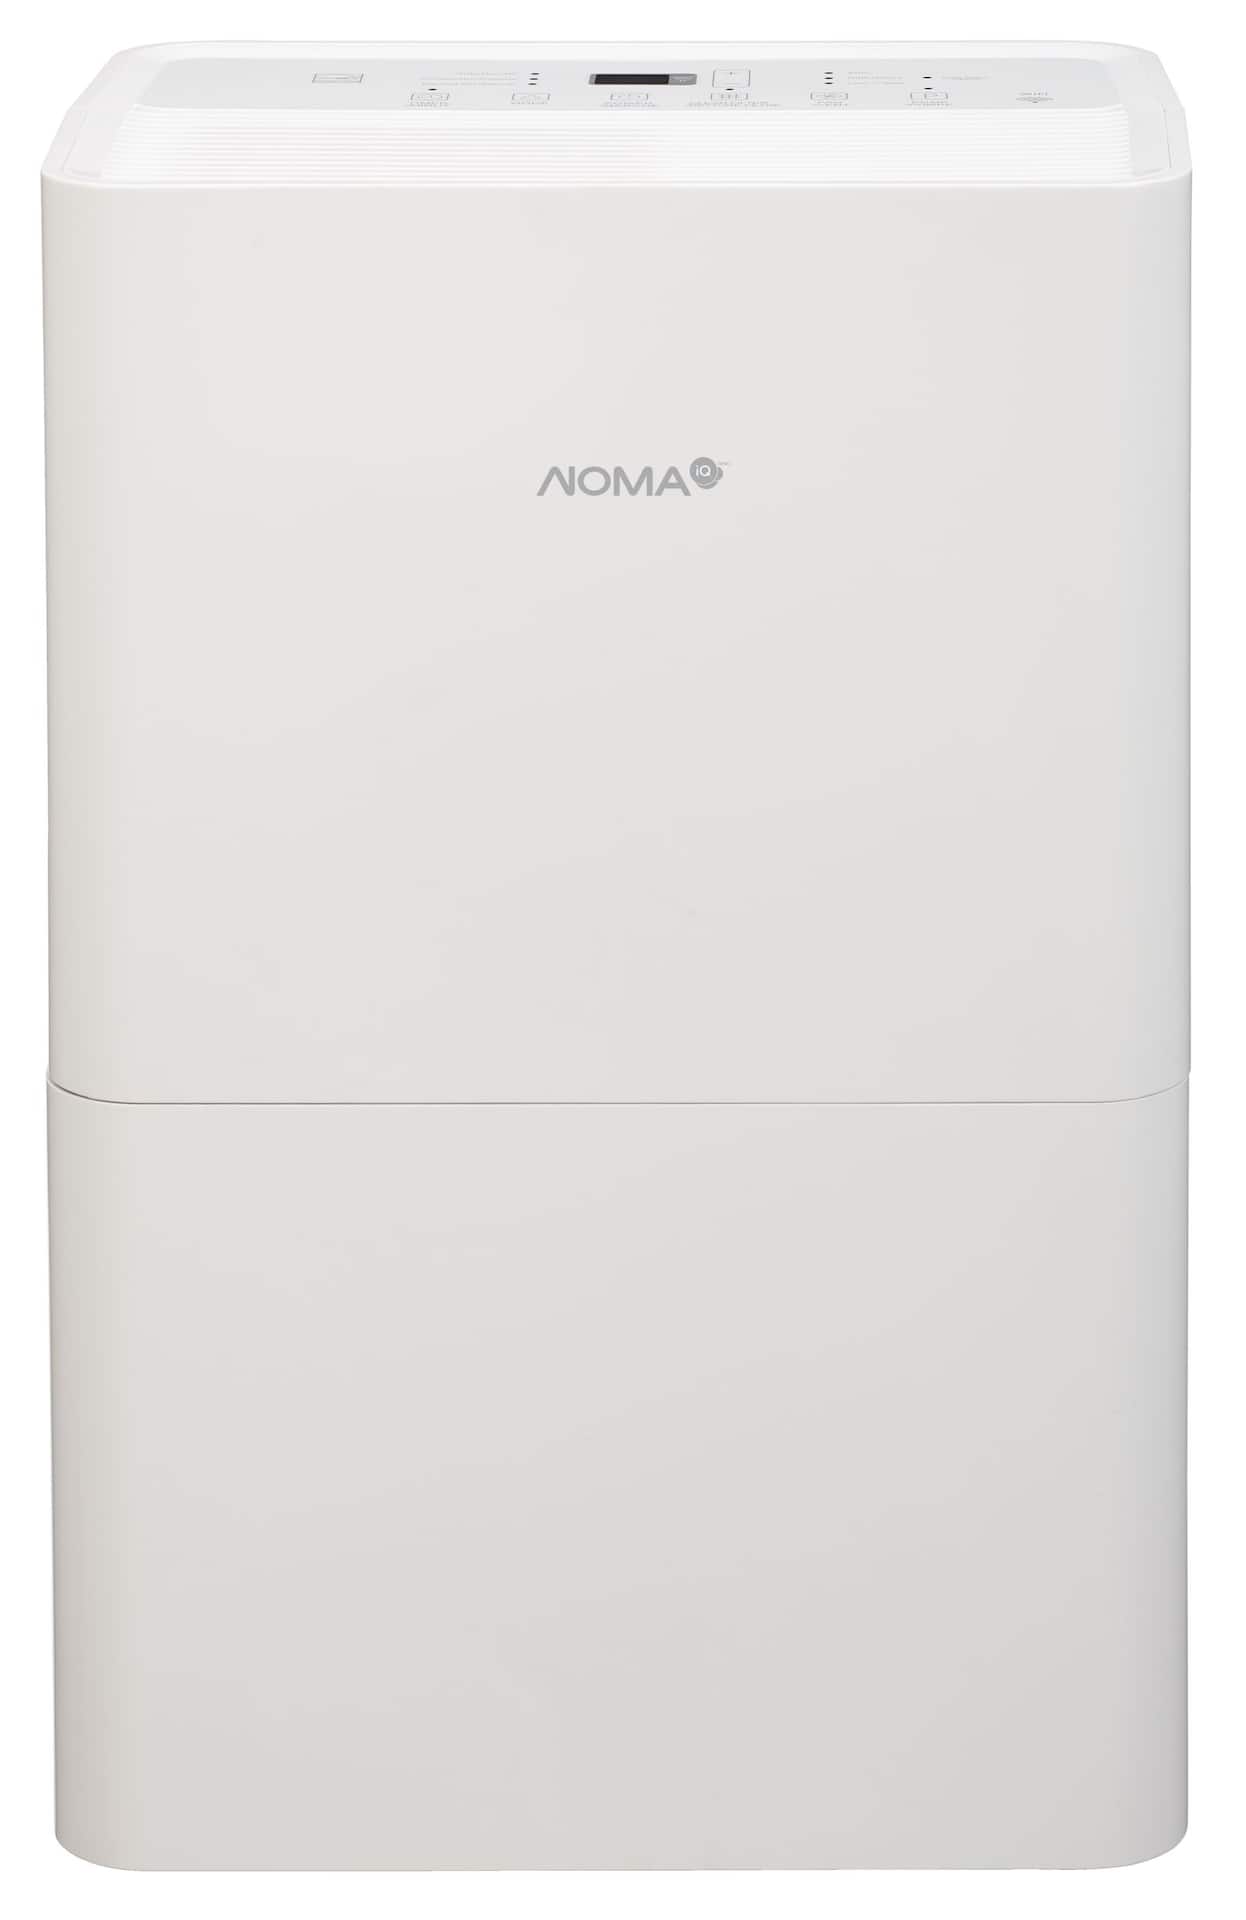 NOMA iQ 35 Pint 2-Speed ENERGY STAR® Most Efficient Dehumidifier